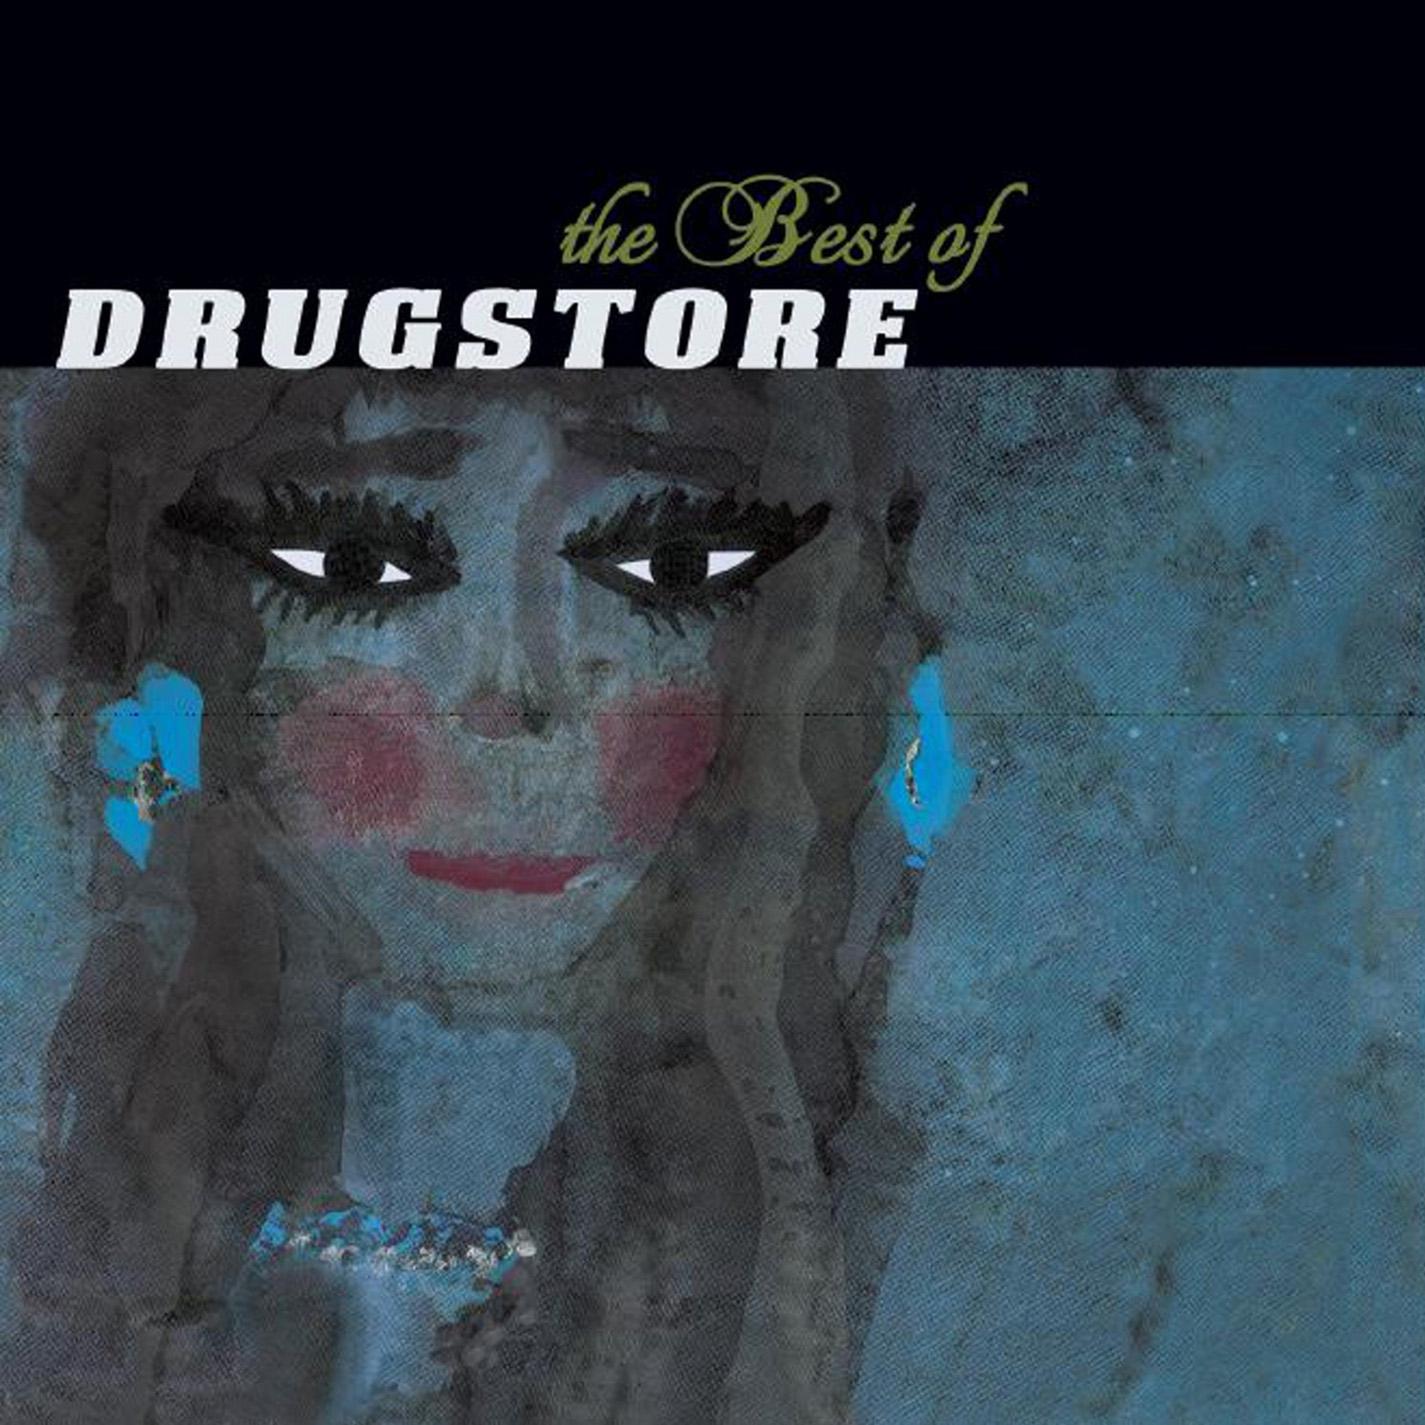 Drugstore - The Funeral